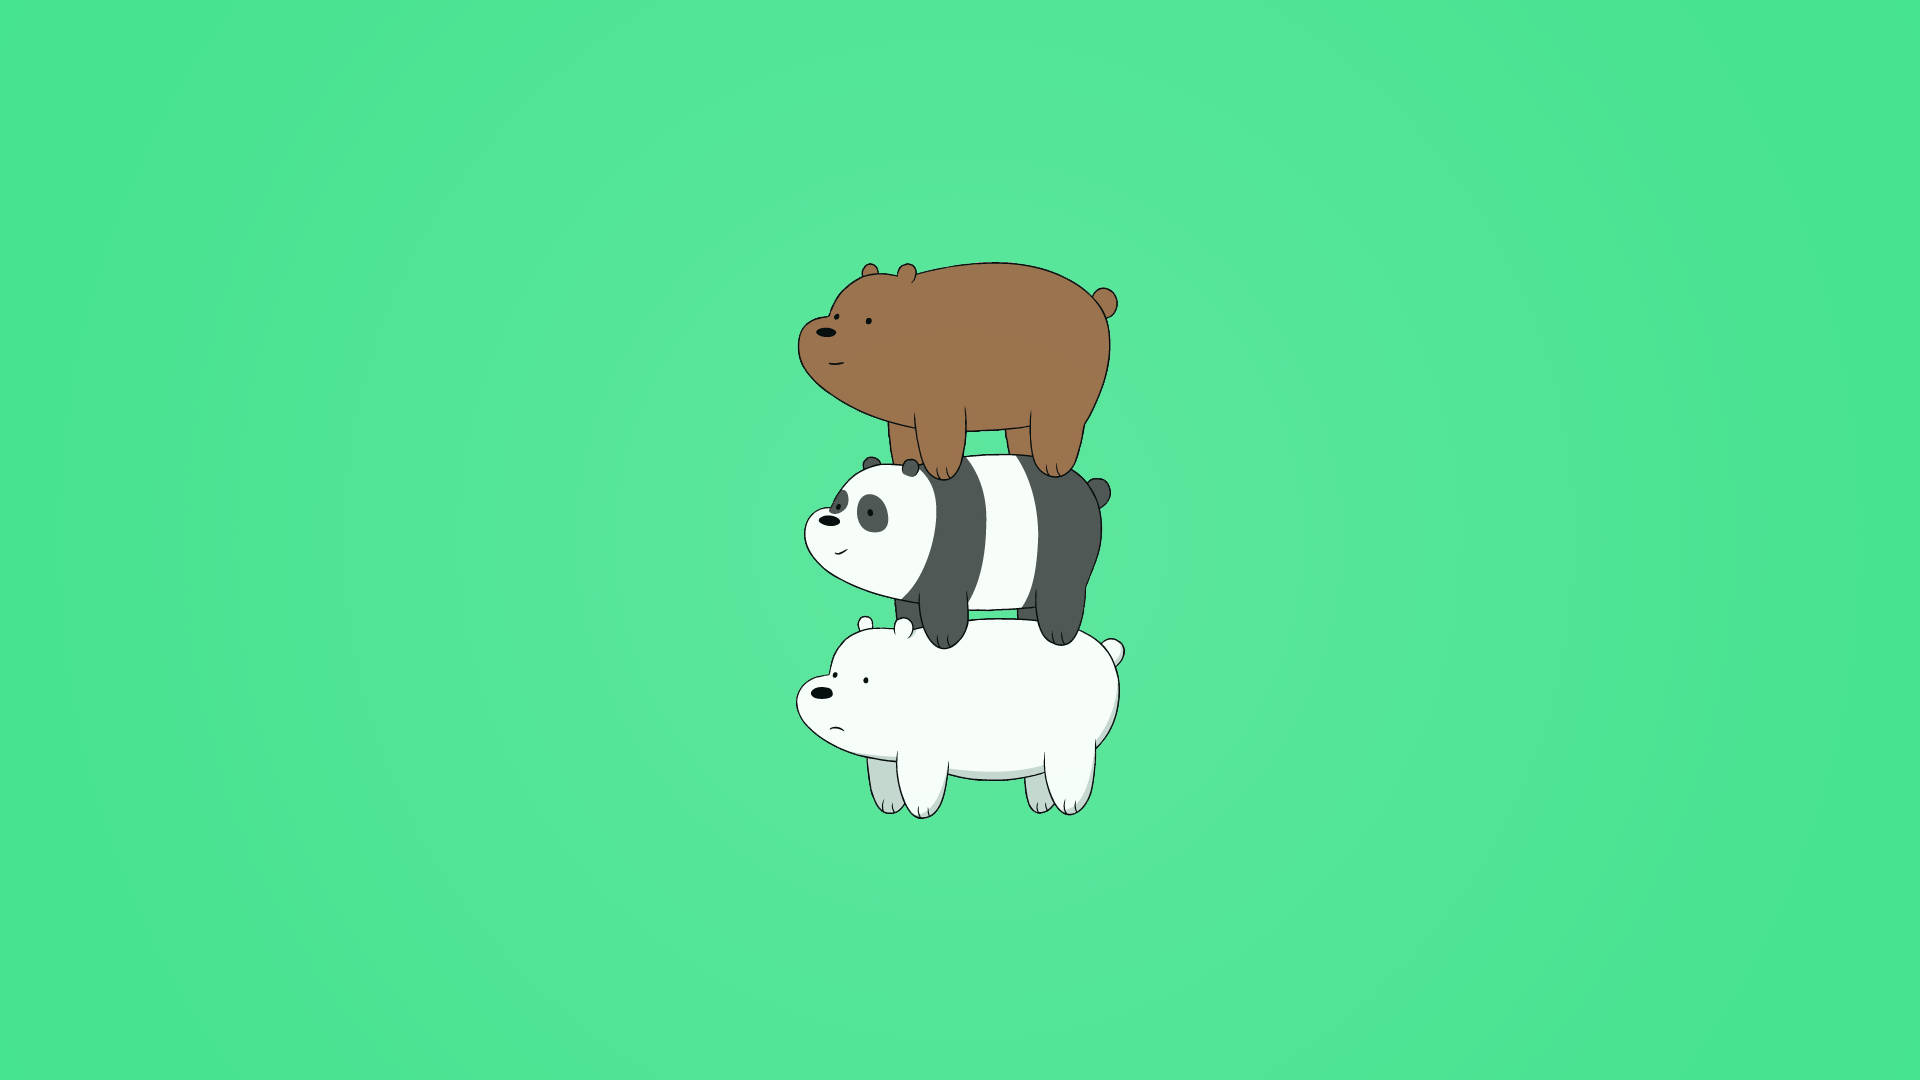 Minimal We Bare Bears In Green Background